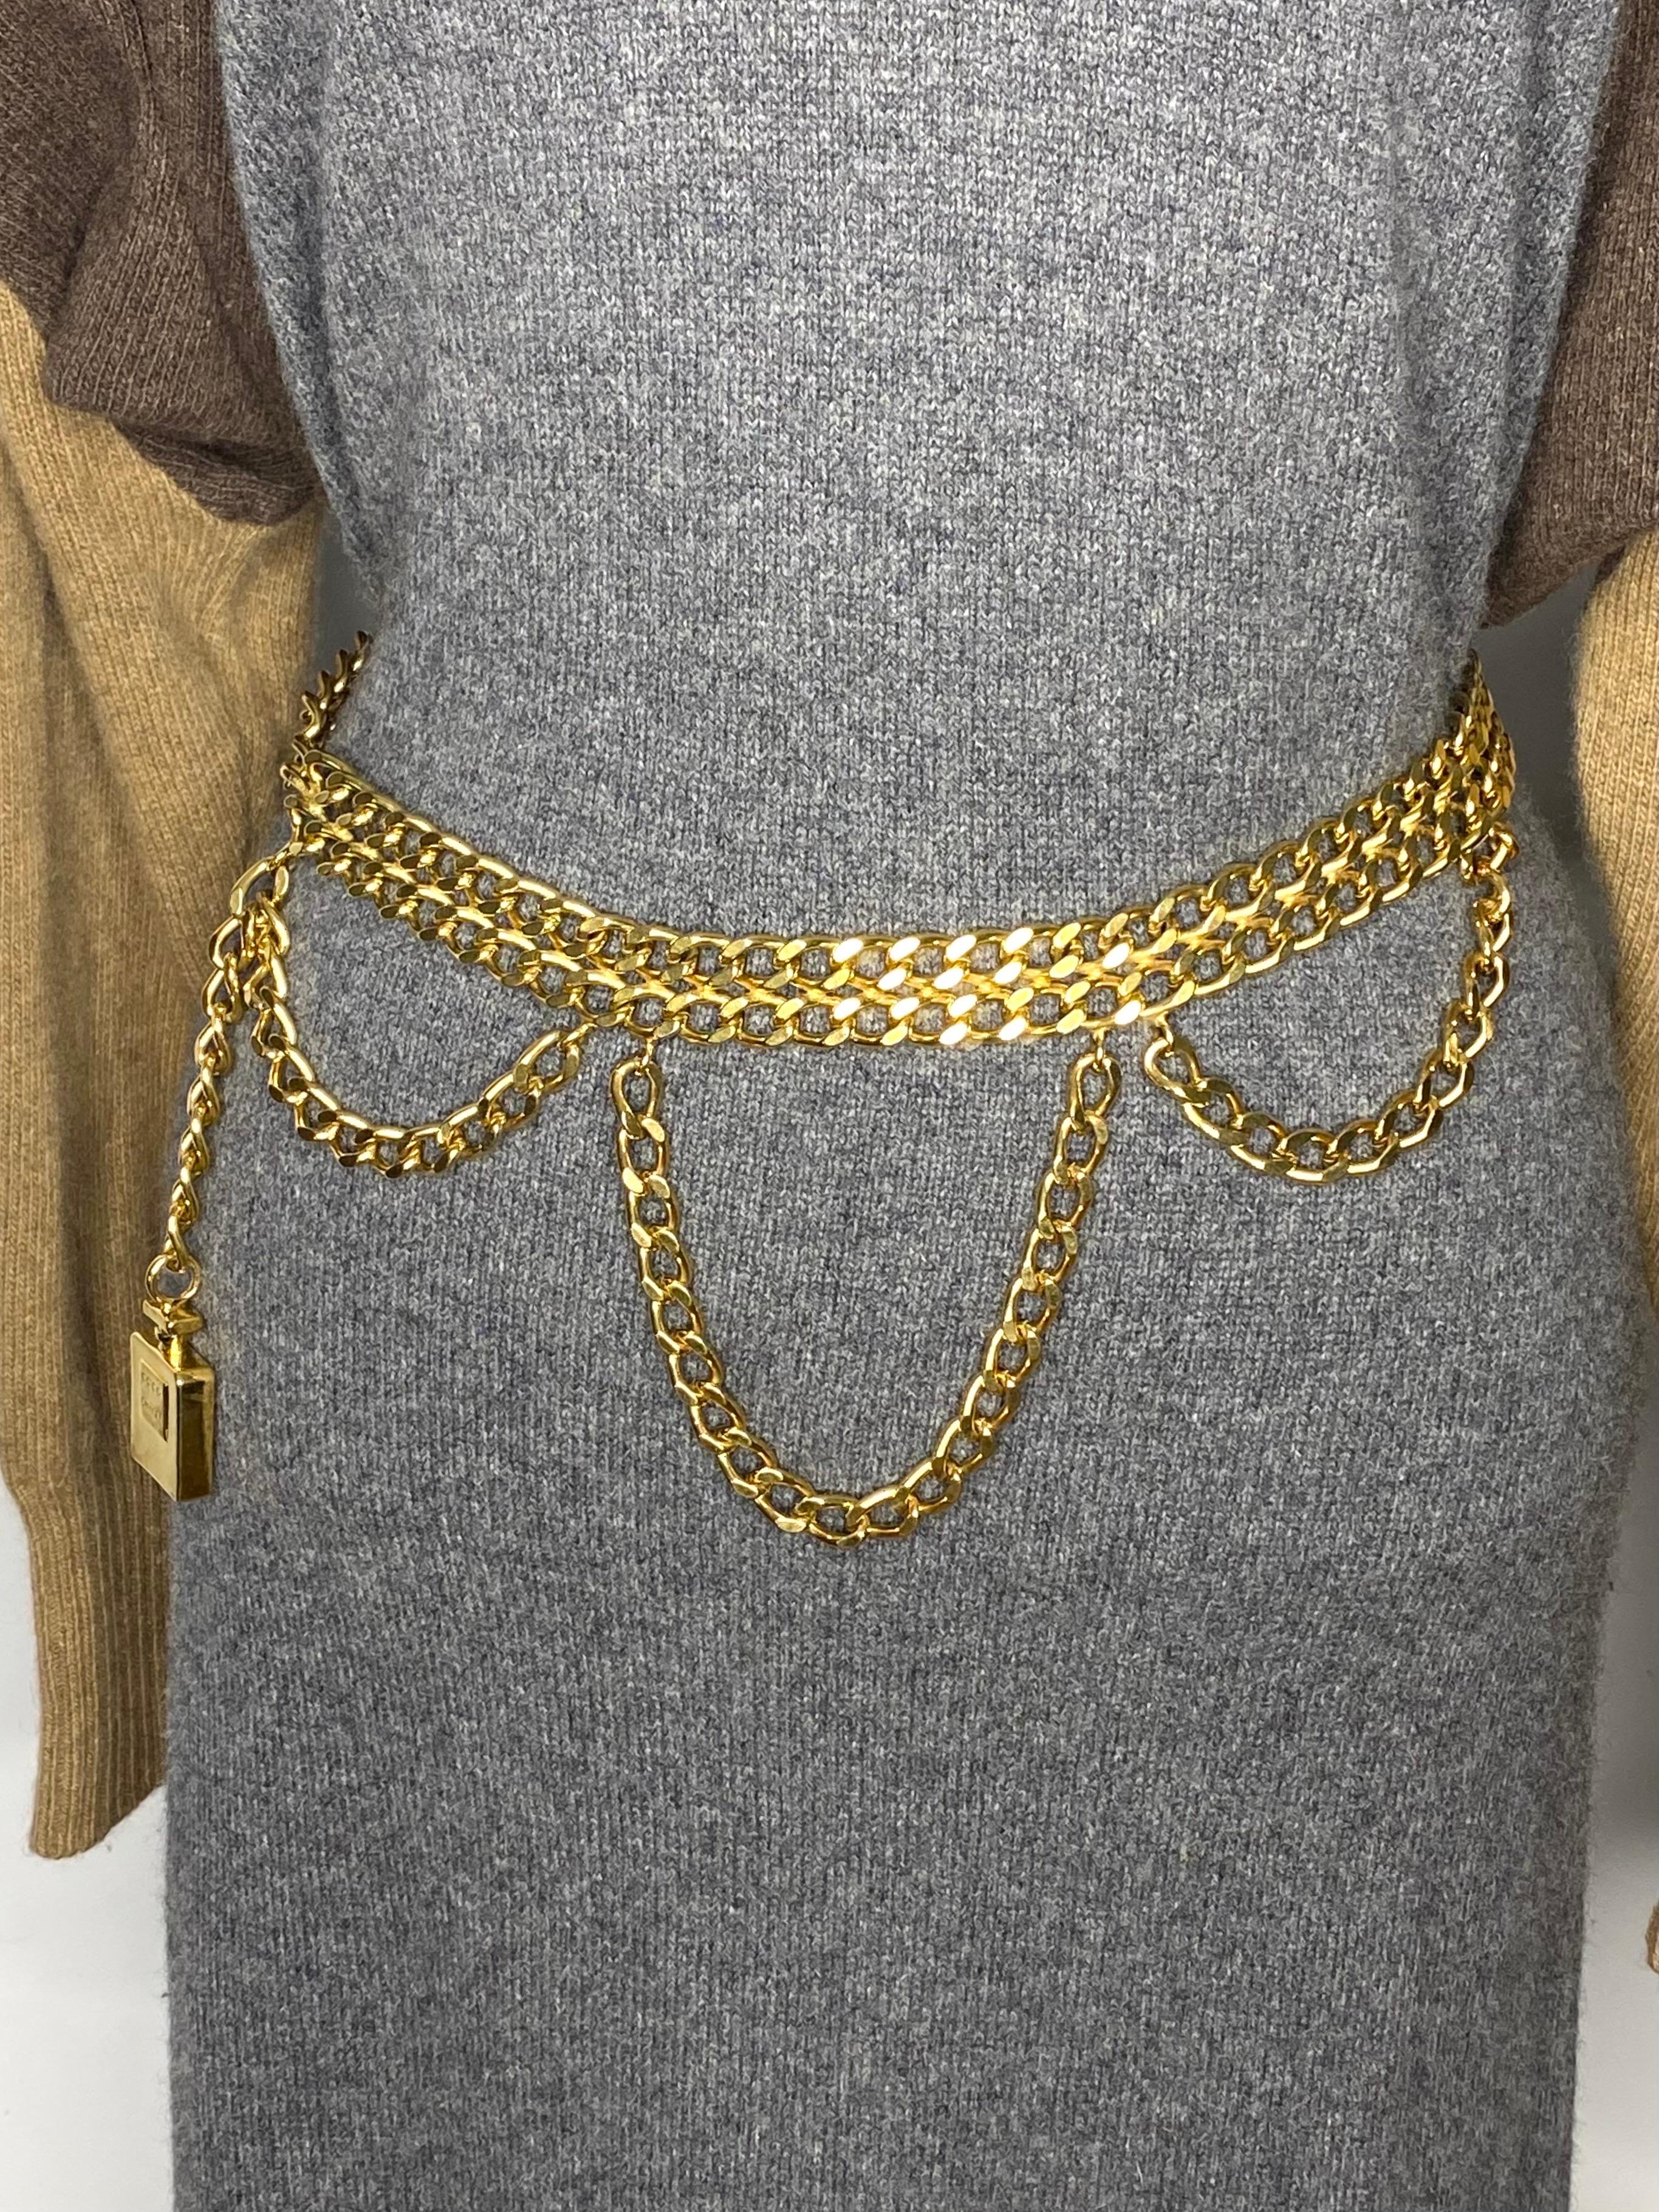 Magnificent vintage chanel
belt, double golden chain
of 2.2 cm, pretty draped
with chains (at the lowest
10cm), ending with a
perfume bottle stamped
coco chanel with a height
of 4cm and 2.8 cm wide.
The chain closes with a
small hook at 72cm.
The